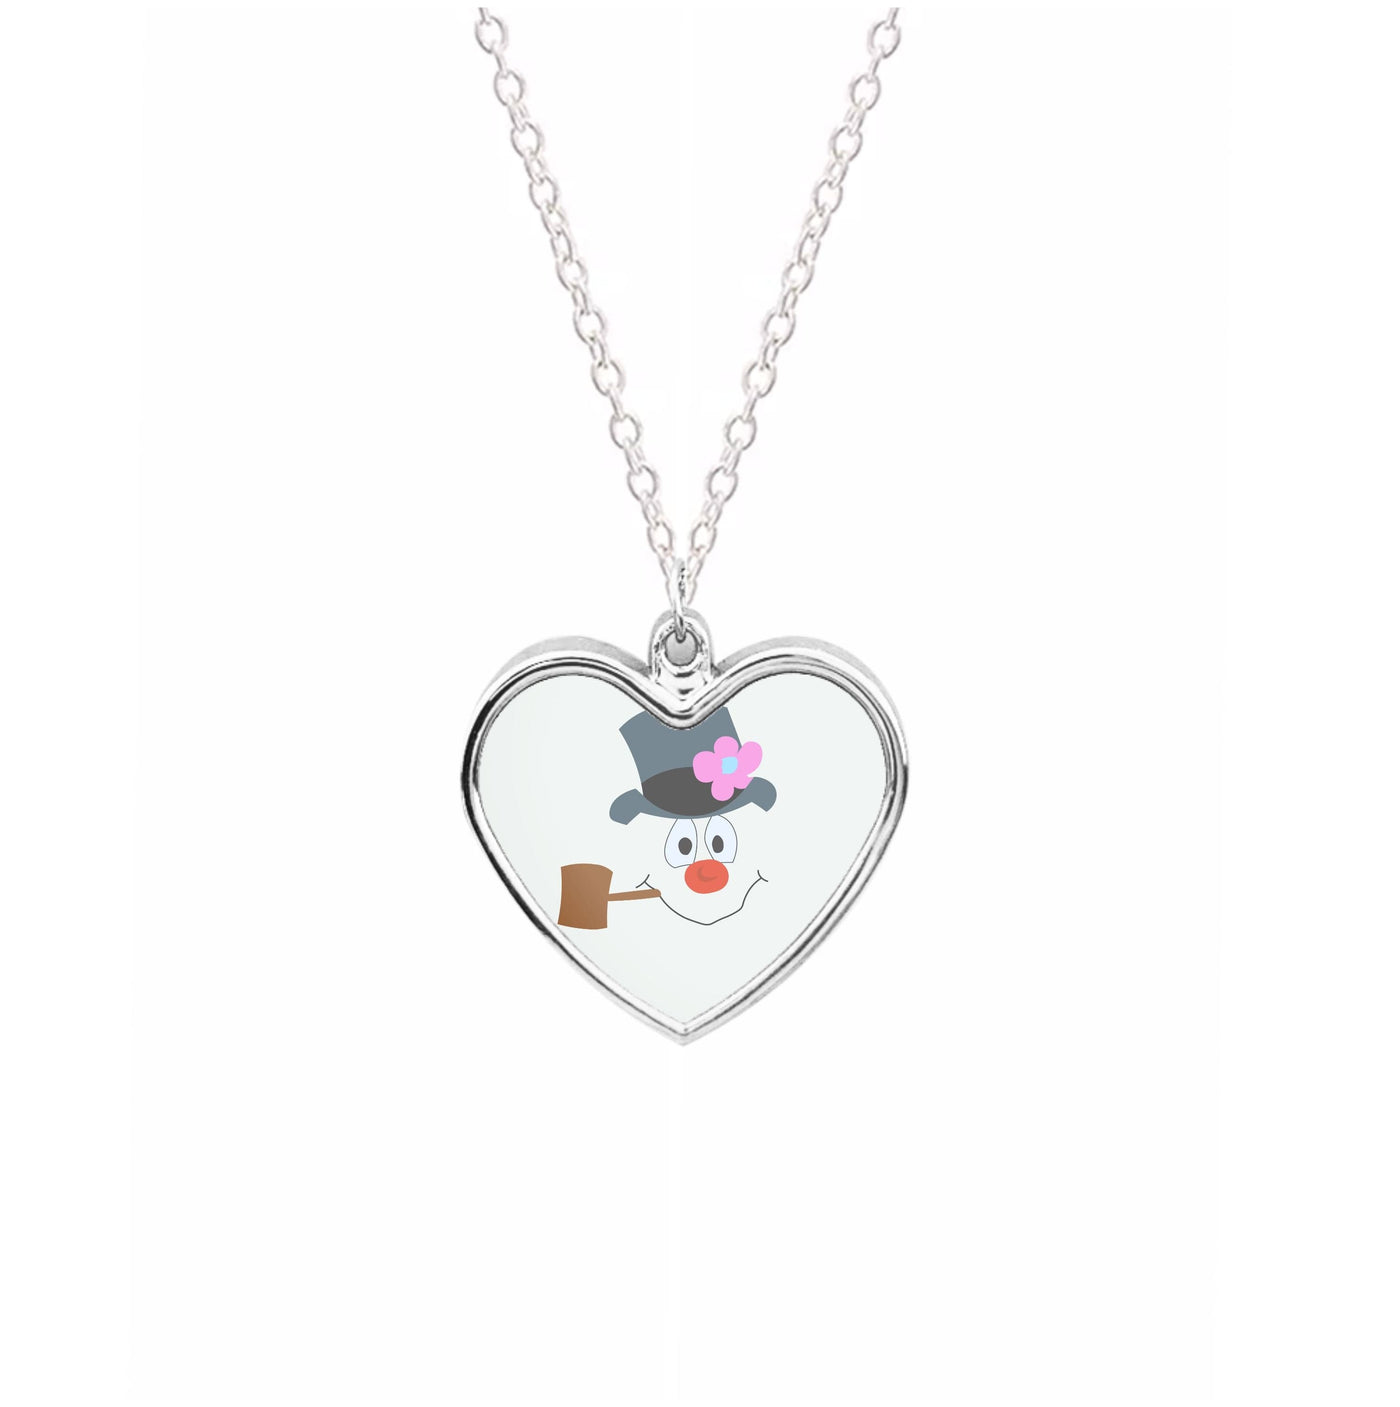 Pipe - Frosty The Snowman  Necklace